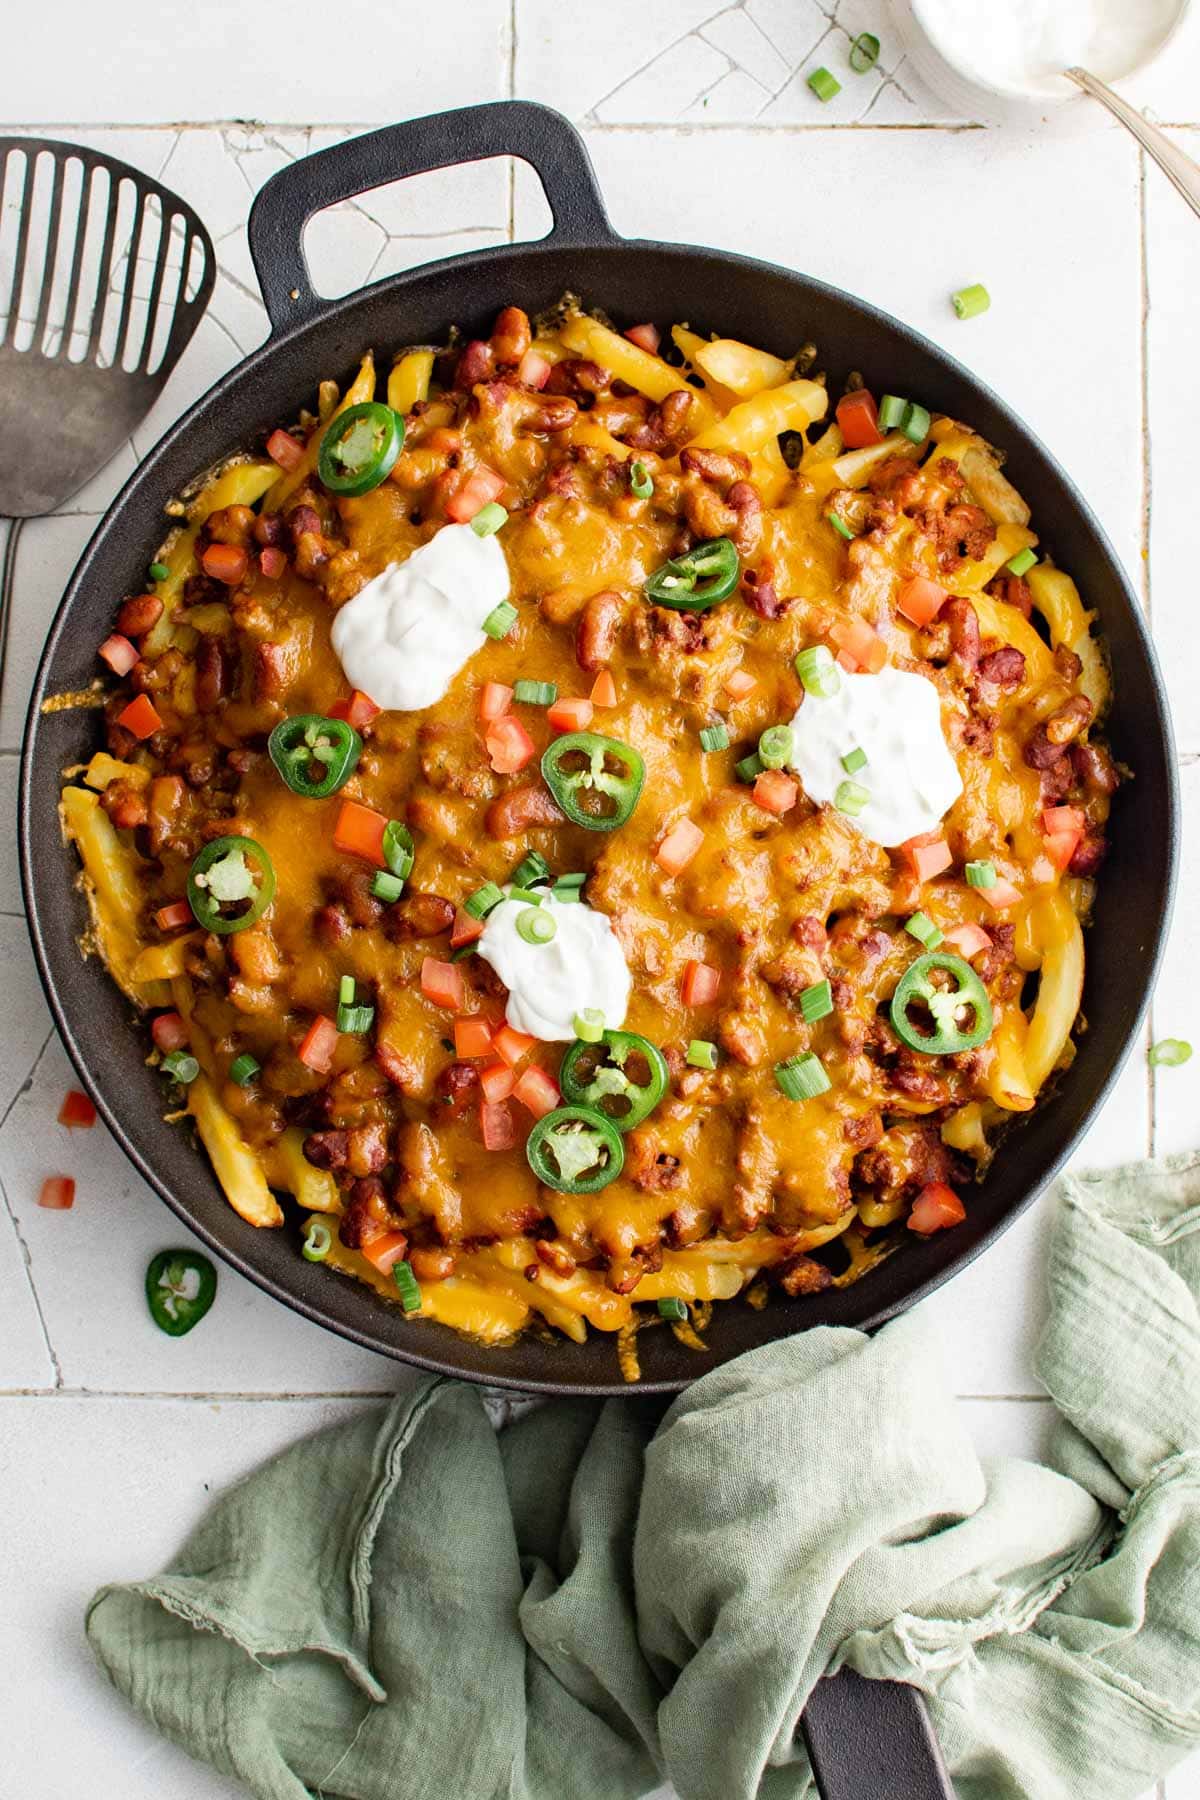 Cast iron skillet loaded with chili cheese french fries and toppings.